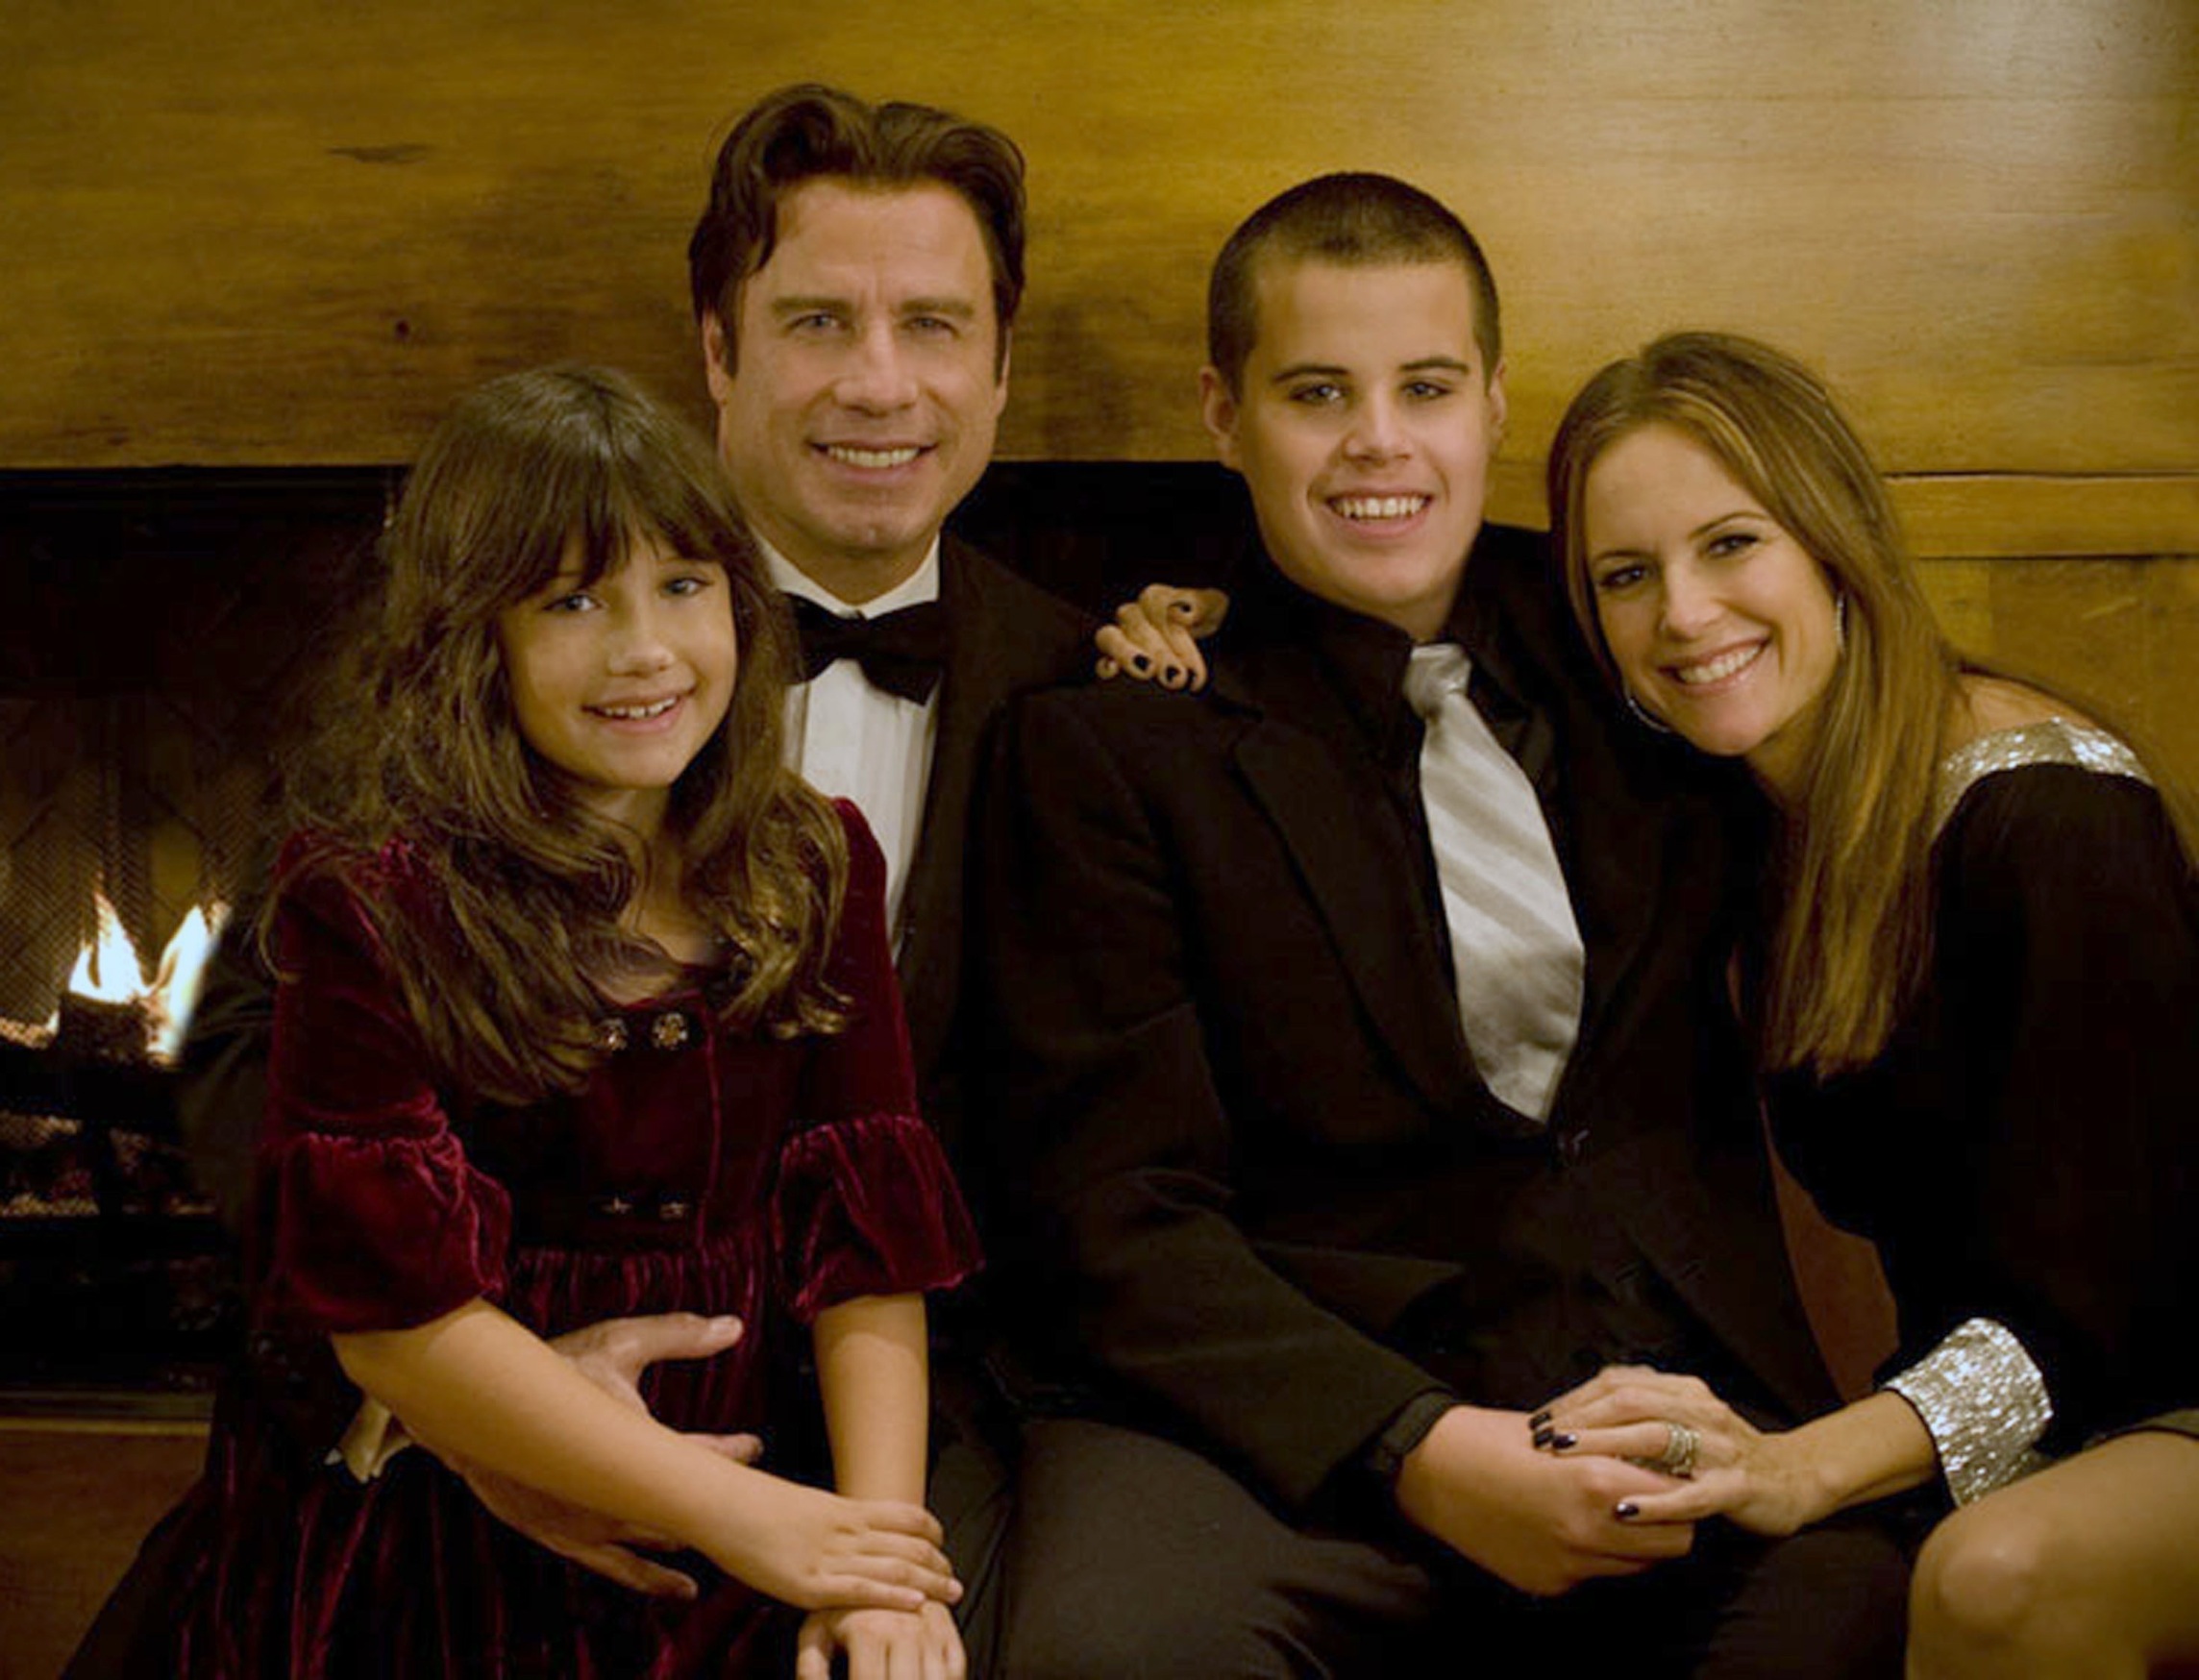 JETT TRAVOLTA, the 16-year-old son of actors JOHN TRAVOLTA and KELLY PRESTON, died at their vacation home in the Bahamas, after apparently hitting his head in the bathtub. He reportedly had a history of seizures. PICTURED: JOHN TRAVOLTA and KELLY PRESTON with daughter ELLA BLEU and son JETT in undated family photo.,Image: 28863327, License: Rights-managed, Restrictions: , Model Release: no, Credit line: f27 / Zuma Press / Profimedia